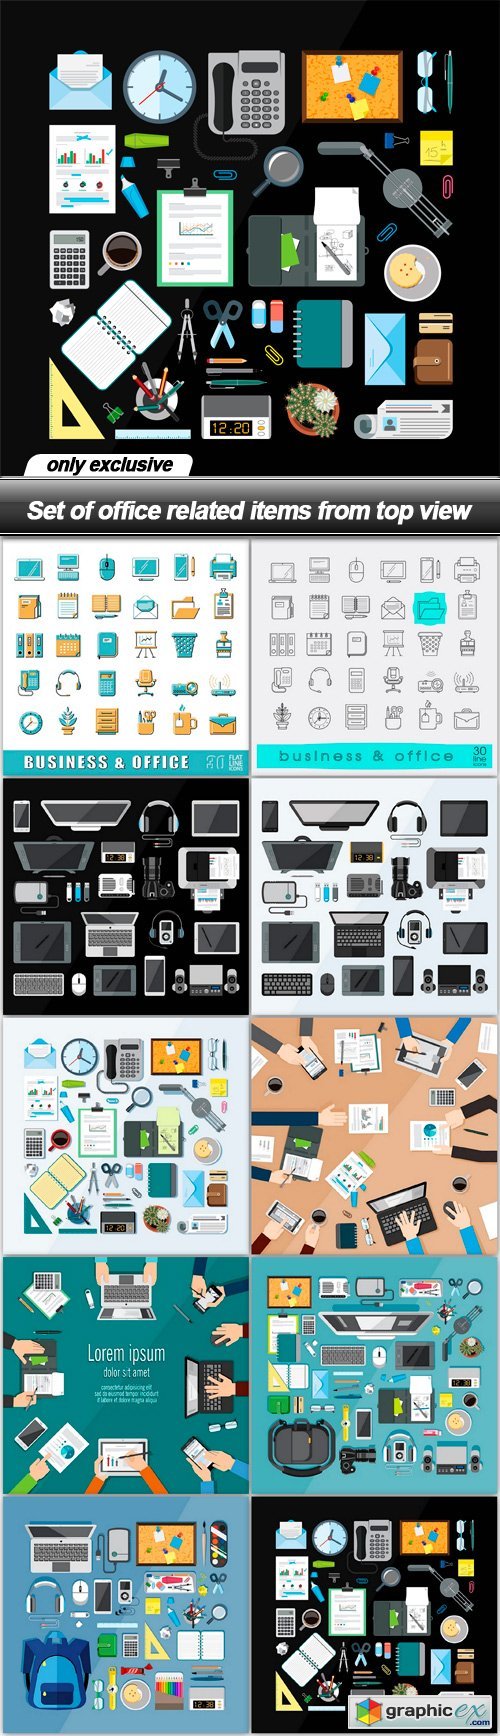 Set of office related items from top view - 10 EPS